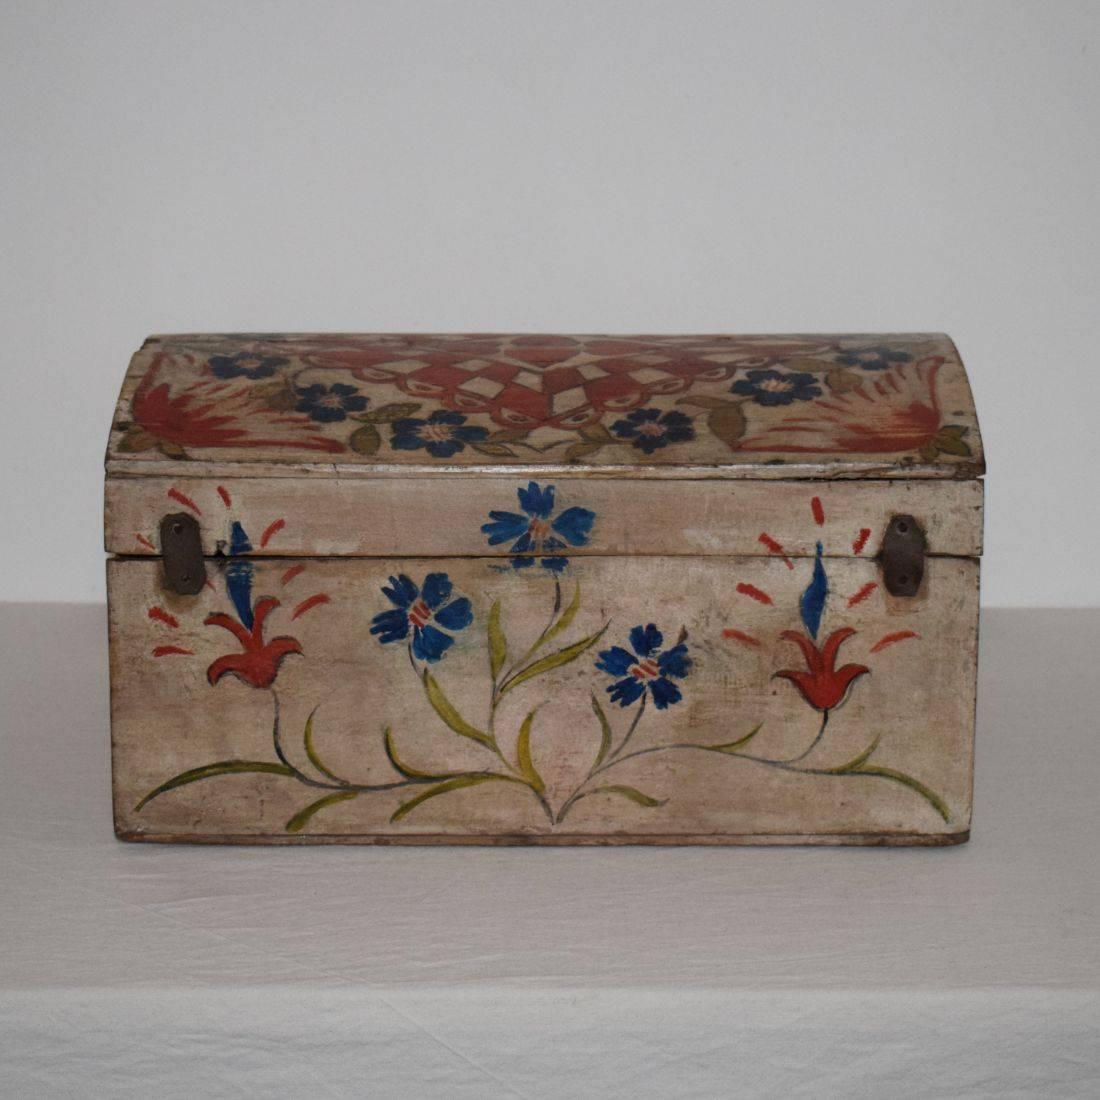 Painted 19th Century French Folk Art Weddingbox from Normandy with Hearts